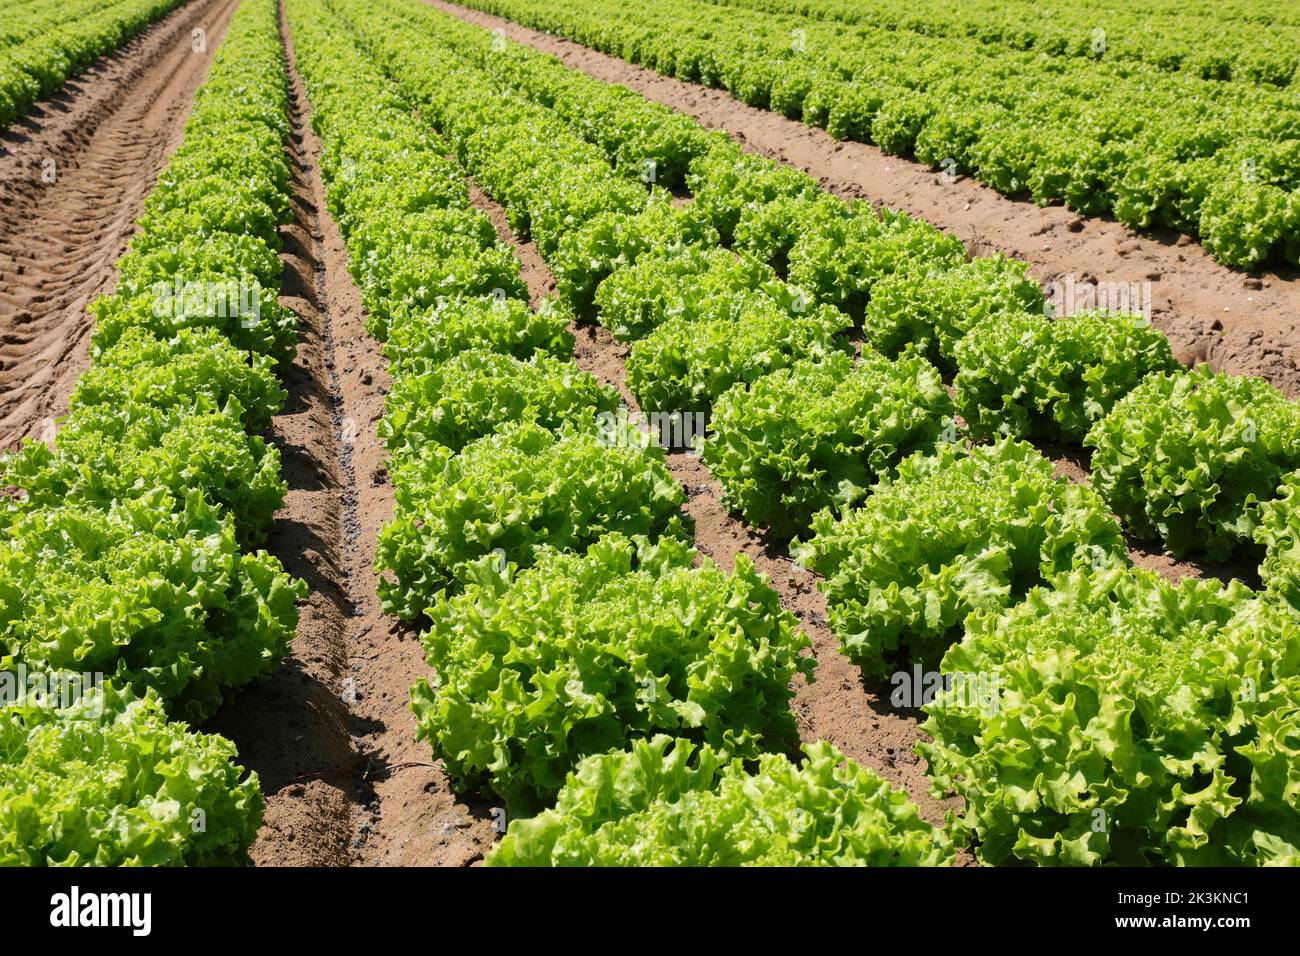 large cultivated field of green lettuce with draining sandy soil in summer Stock Photo